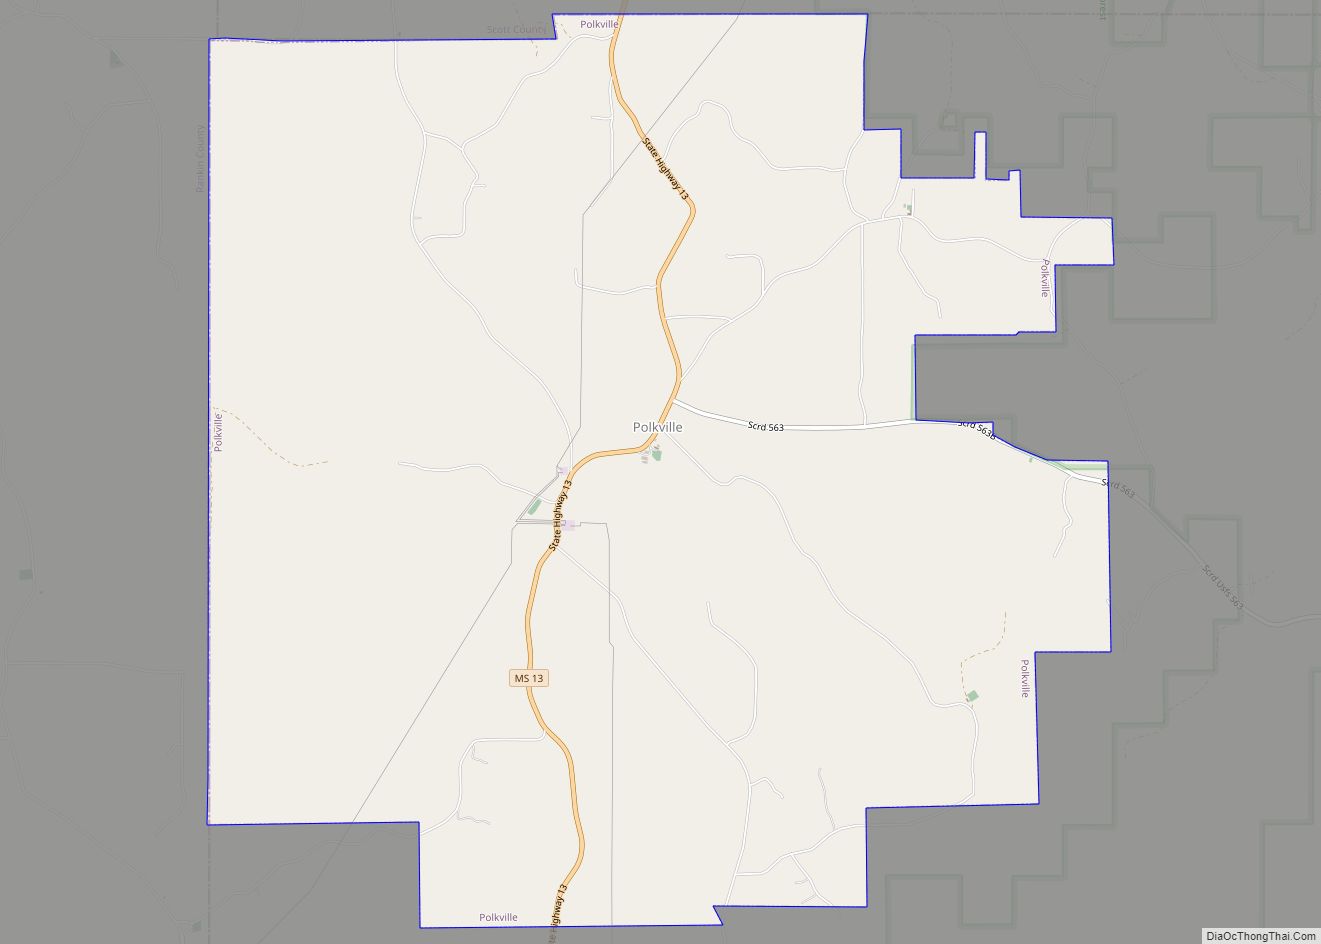 Map of Polkville town